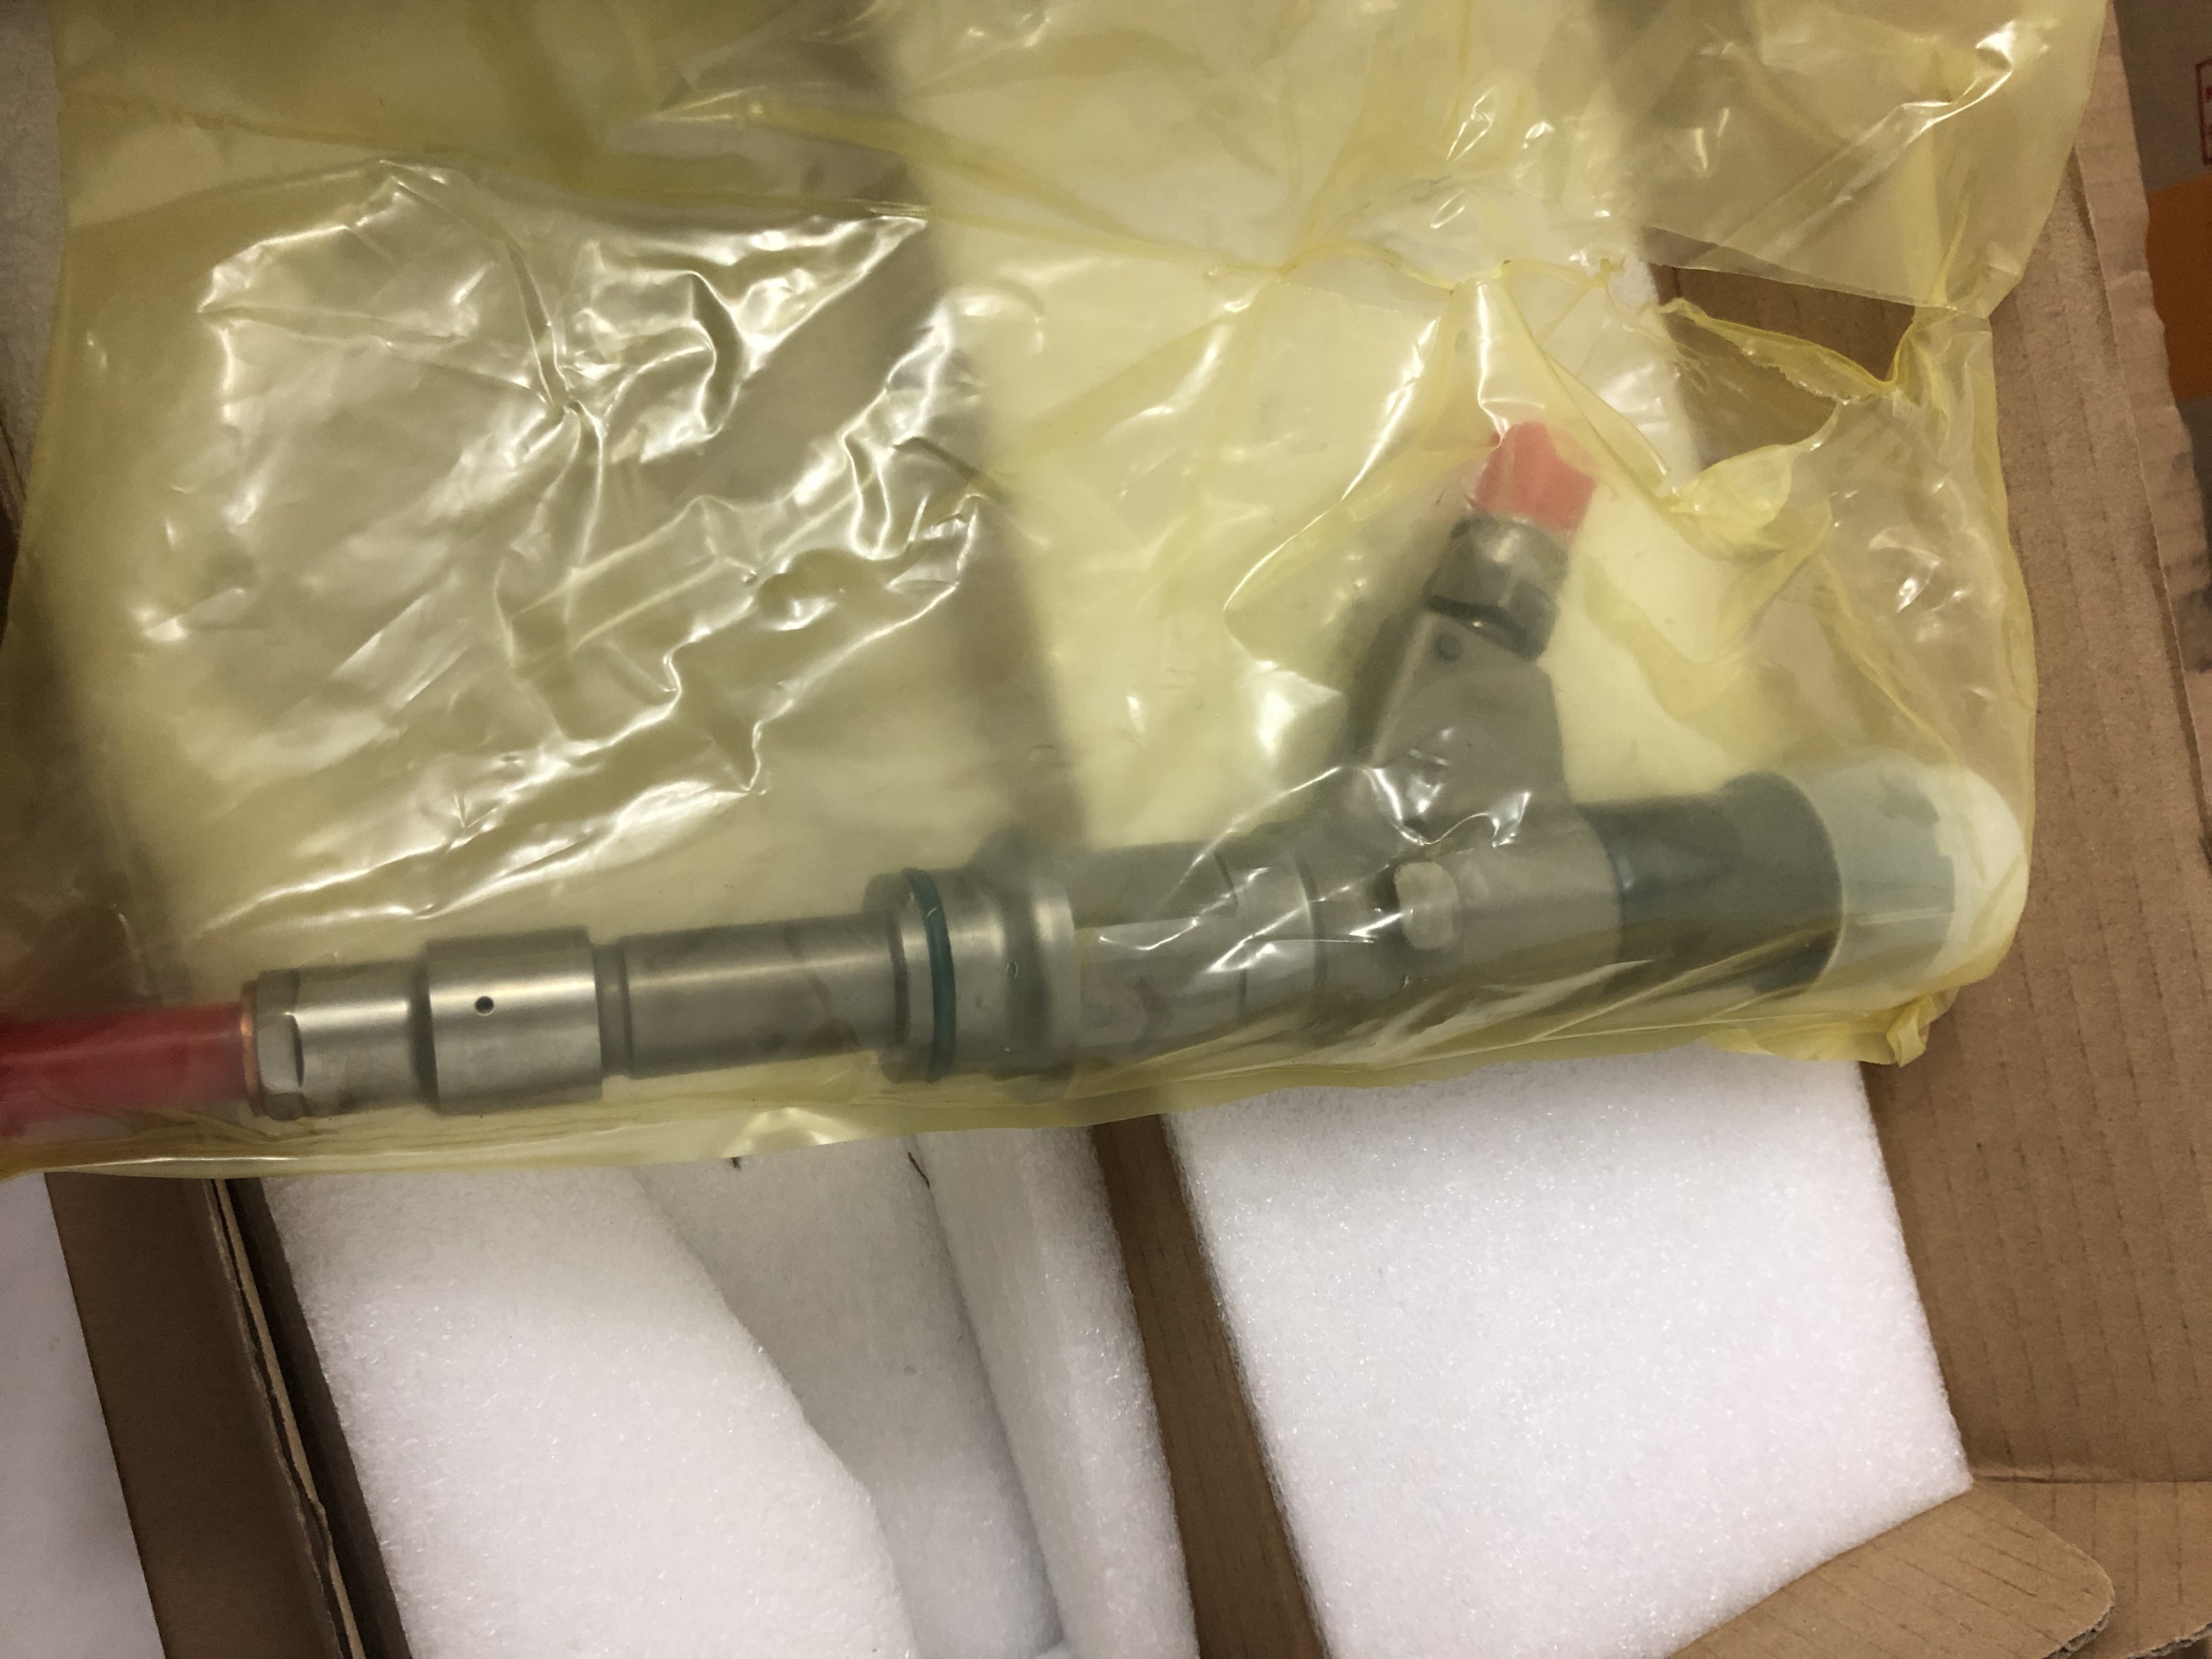  Cummins injector 4307475 fit for ISG engine Manufactures